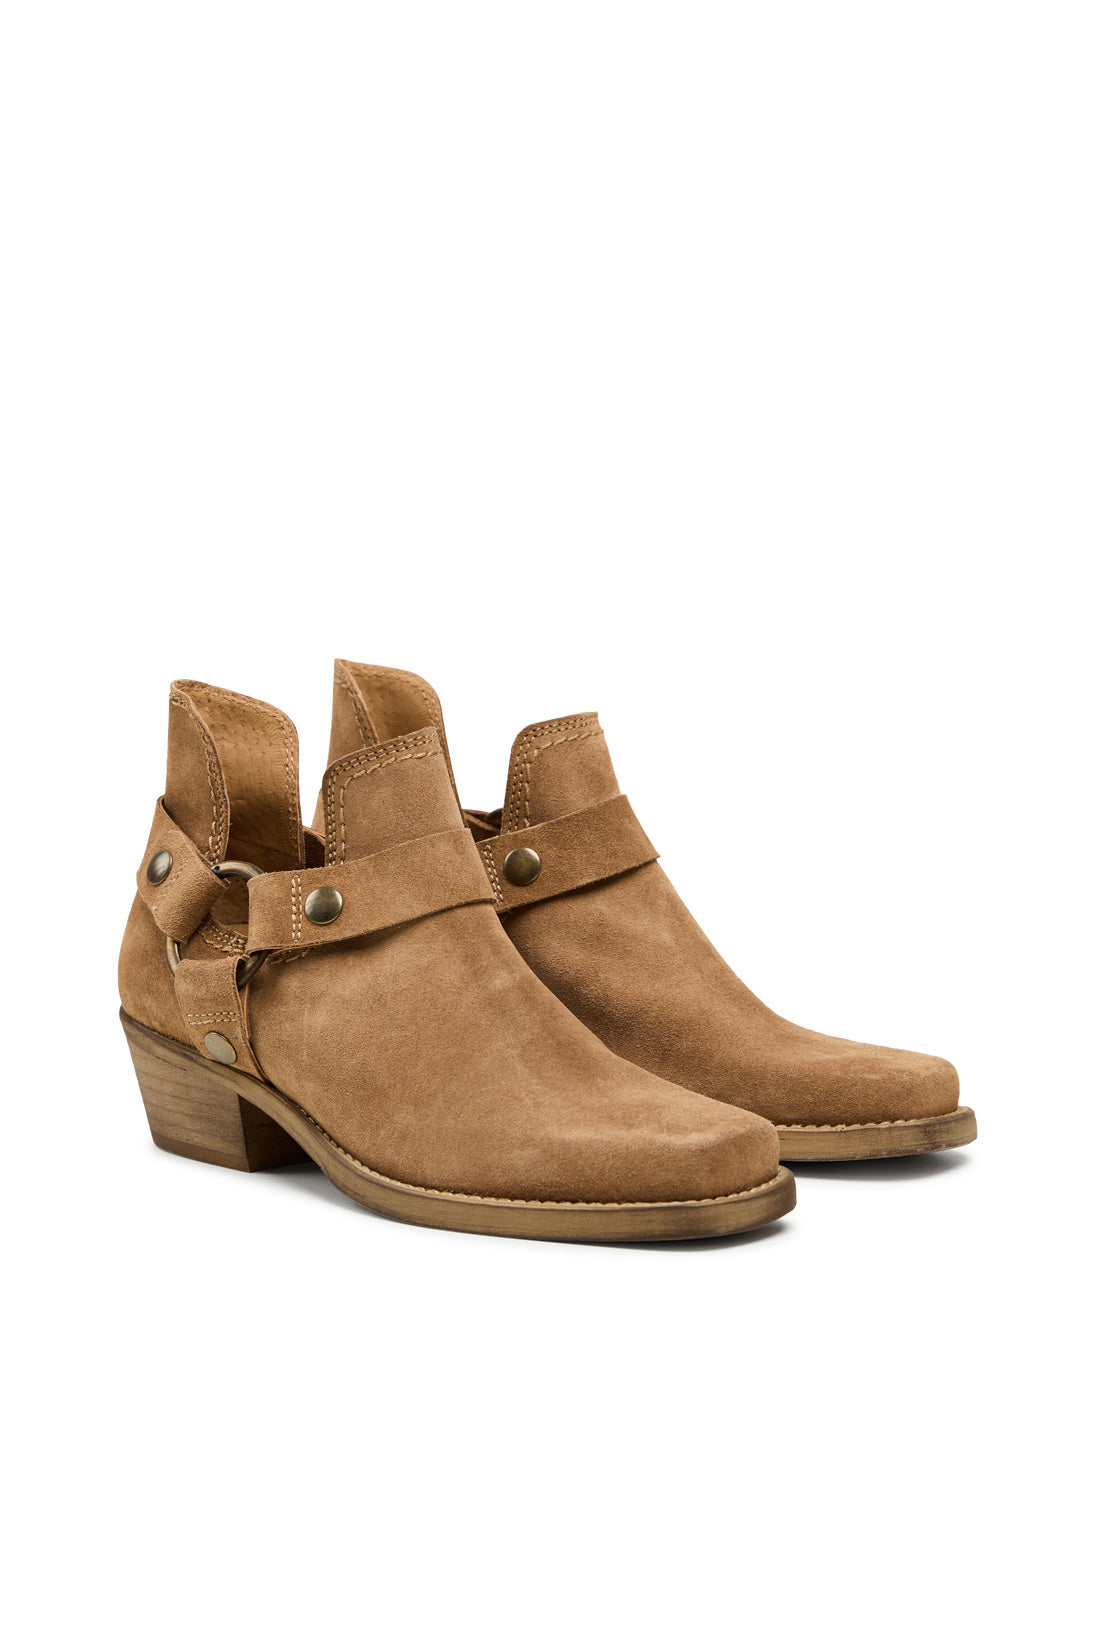 Lauryn Leather Boot - Taupe Suede